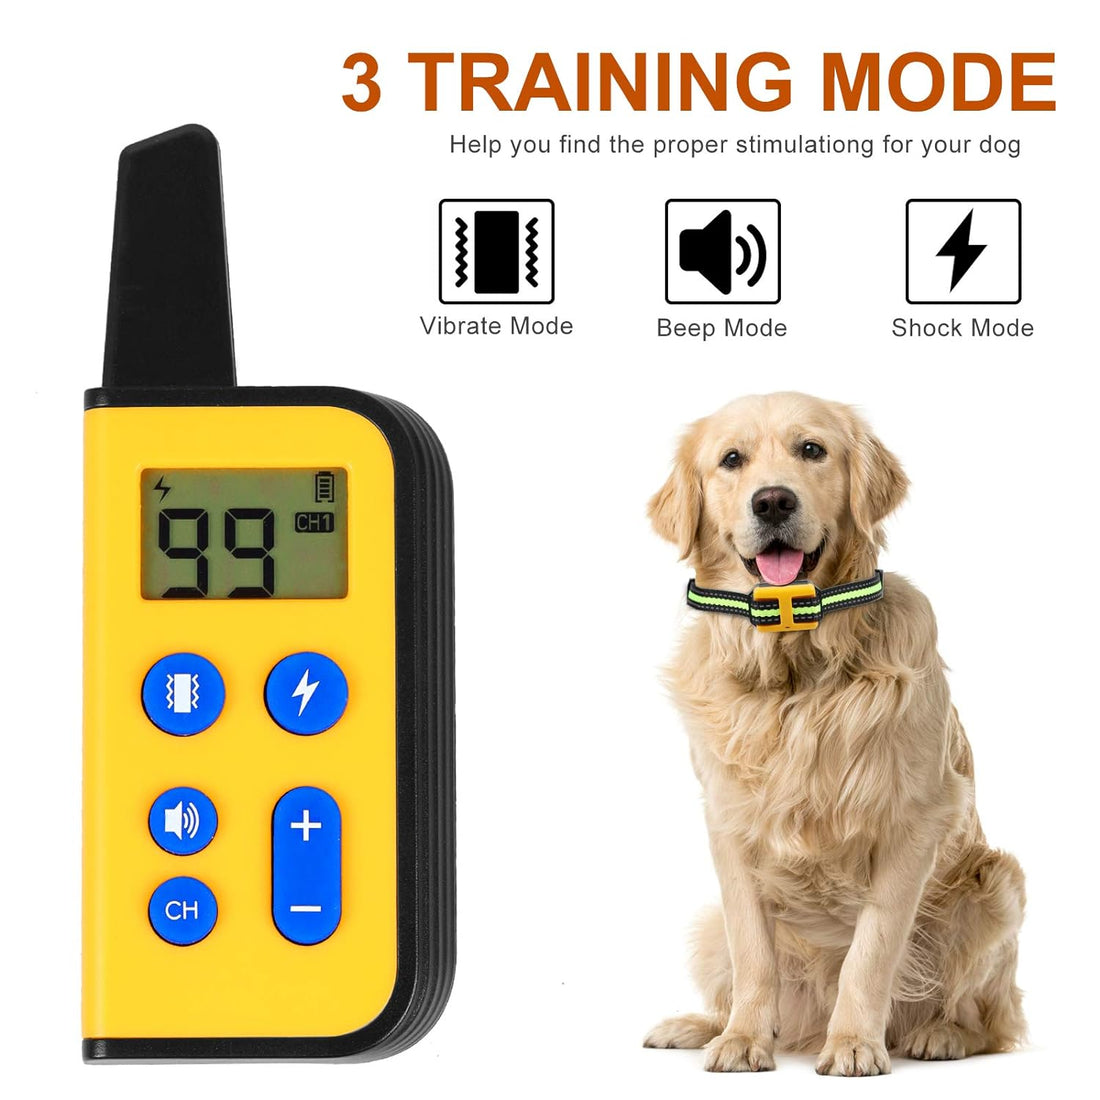 Patroaint Rechargeable100% Waterproof Dog Training Collar, Three Modes, Beep Sound, Adjustable Vibration and Shock Mode,Suitable for Small to Large Dogs 5-140lbs,Long Distance Up to 1800Ft